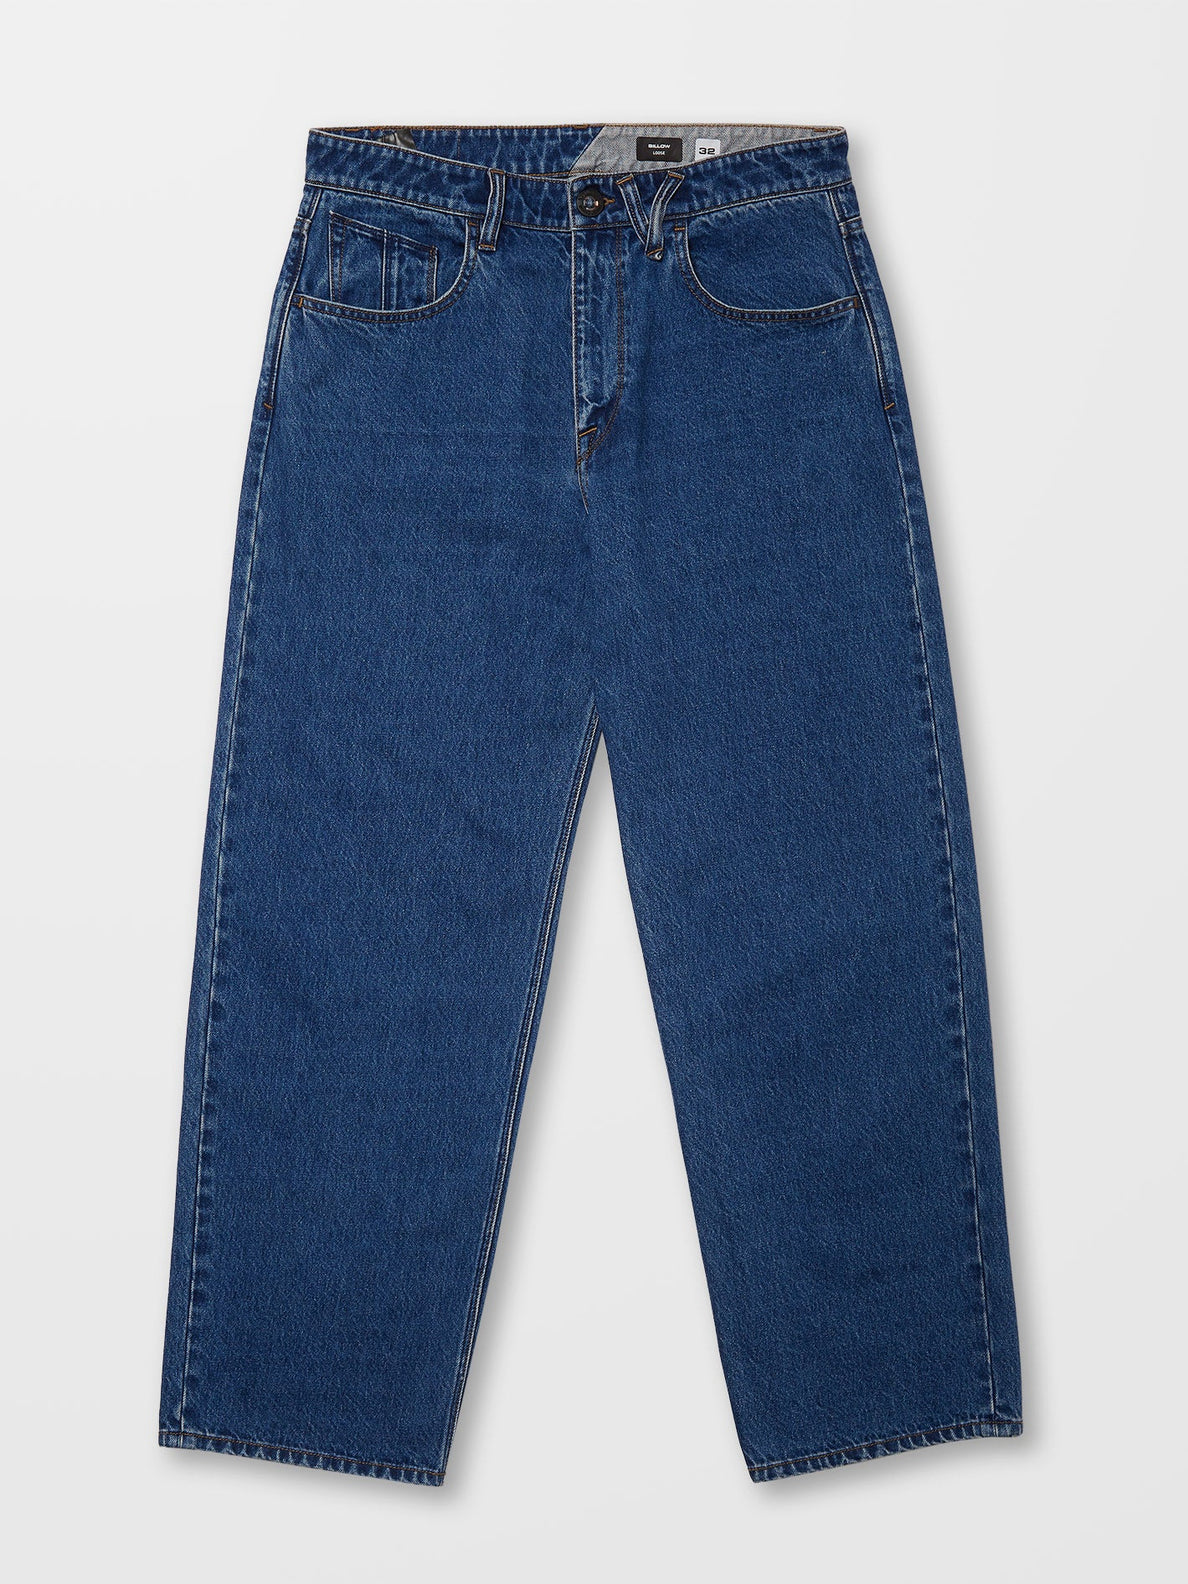 Billow Jeans - OLIVER MID BLUE (A1932205_OMB) [1]